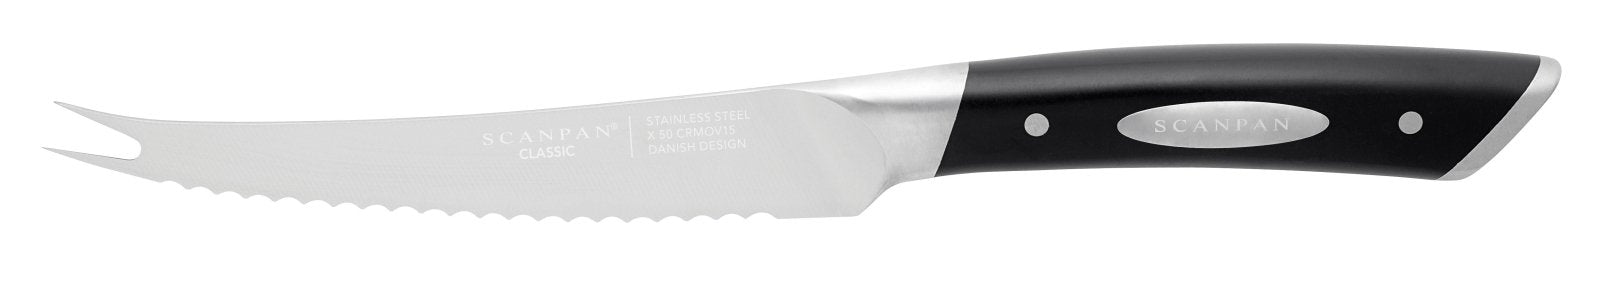 Scanpan Classic 14cm Tomato & Cheese Knife - SP92081400 - The Cotswold Knife Company